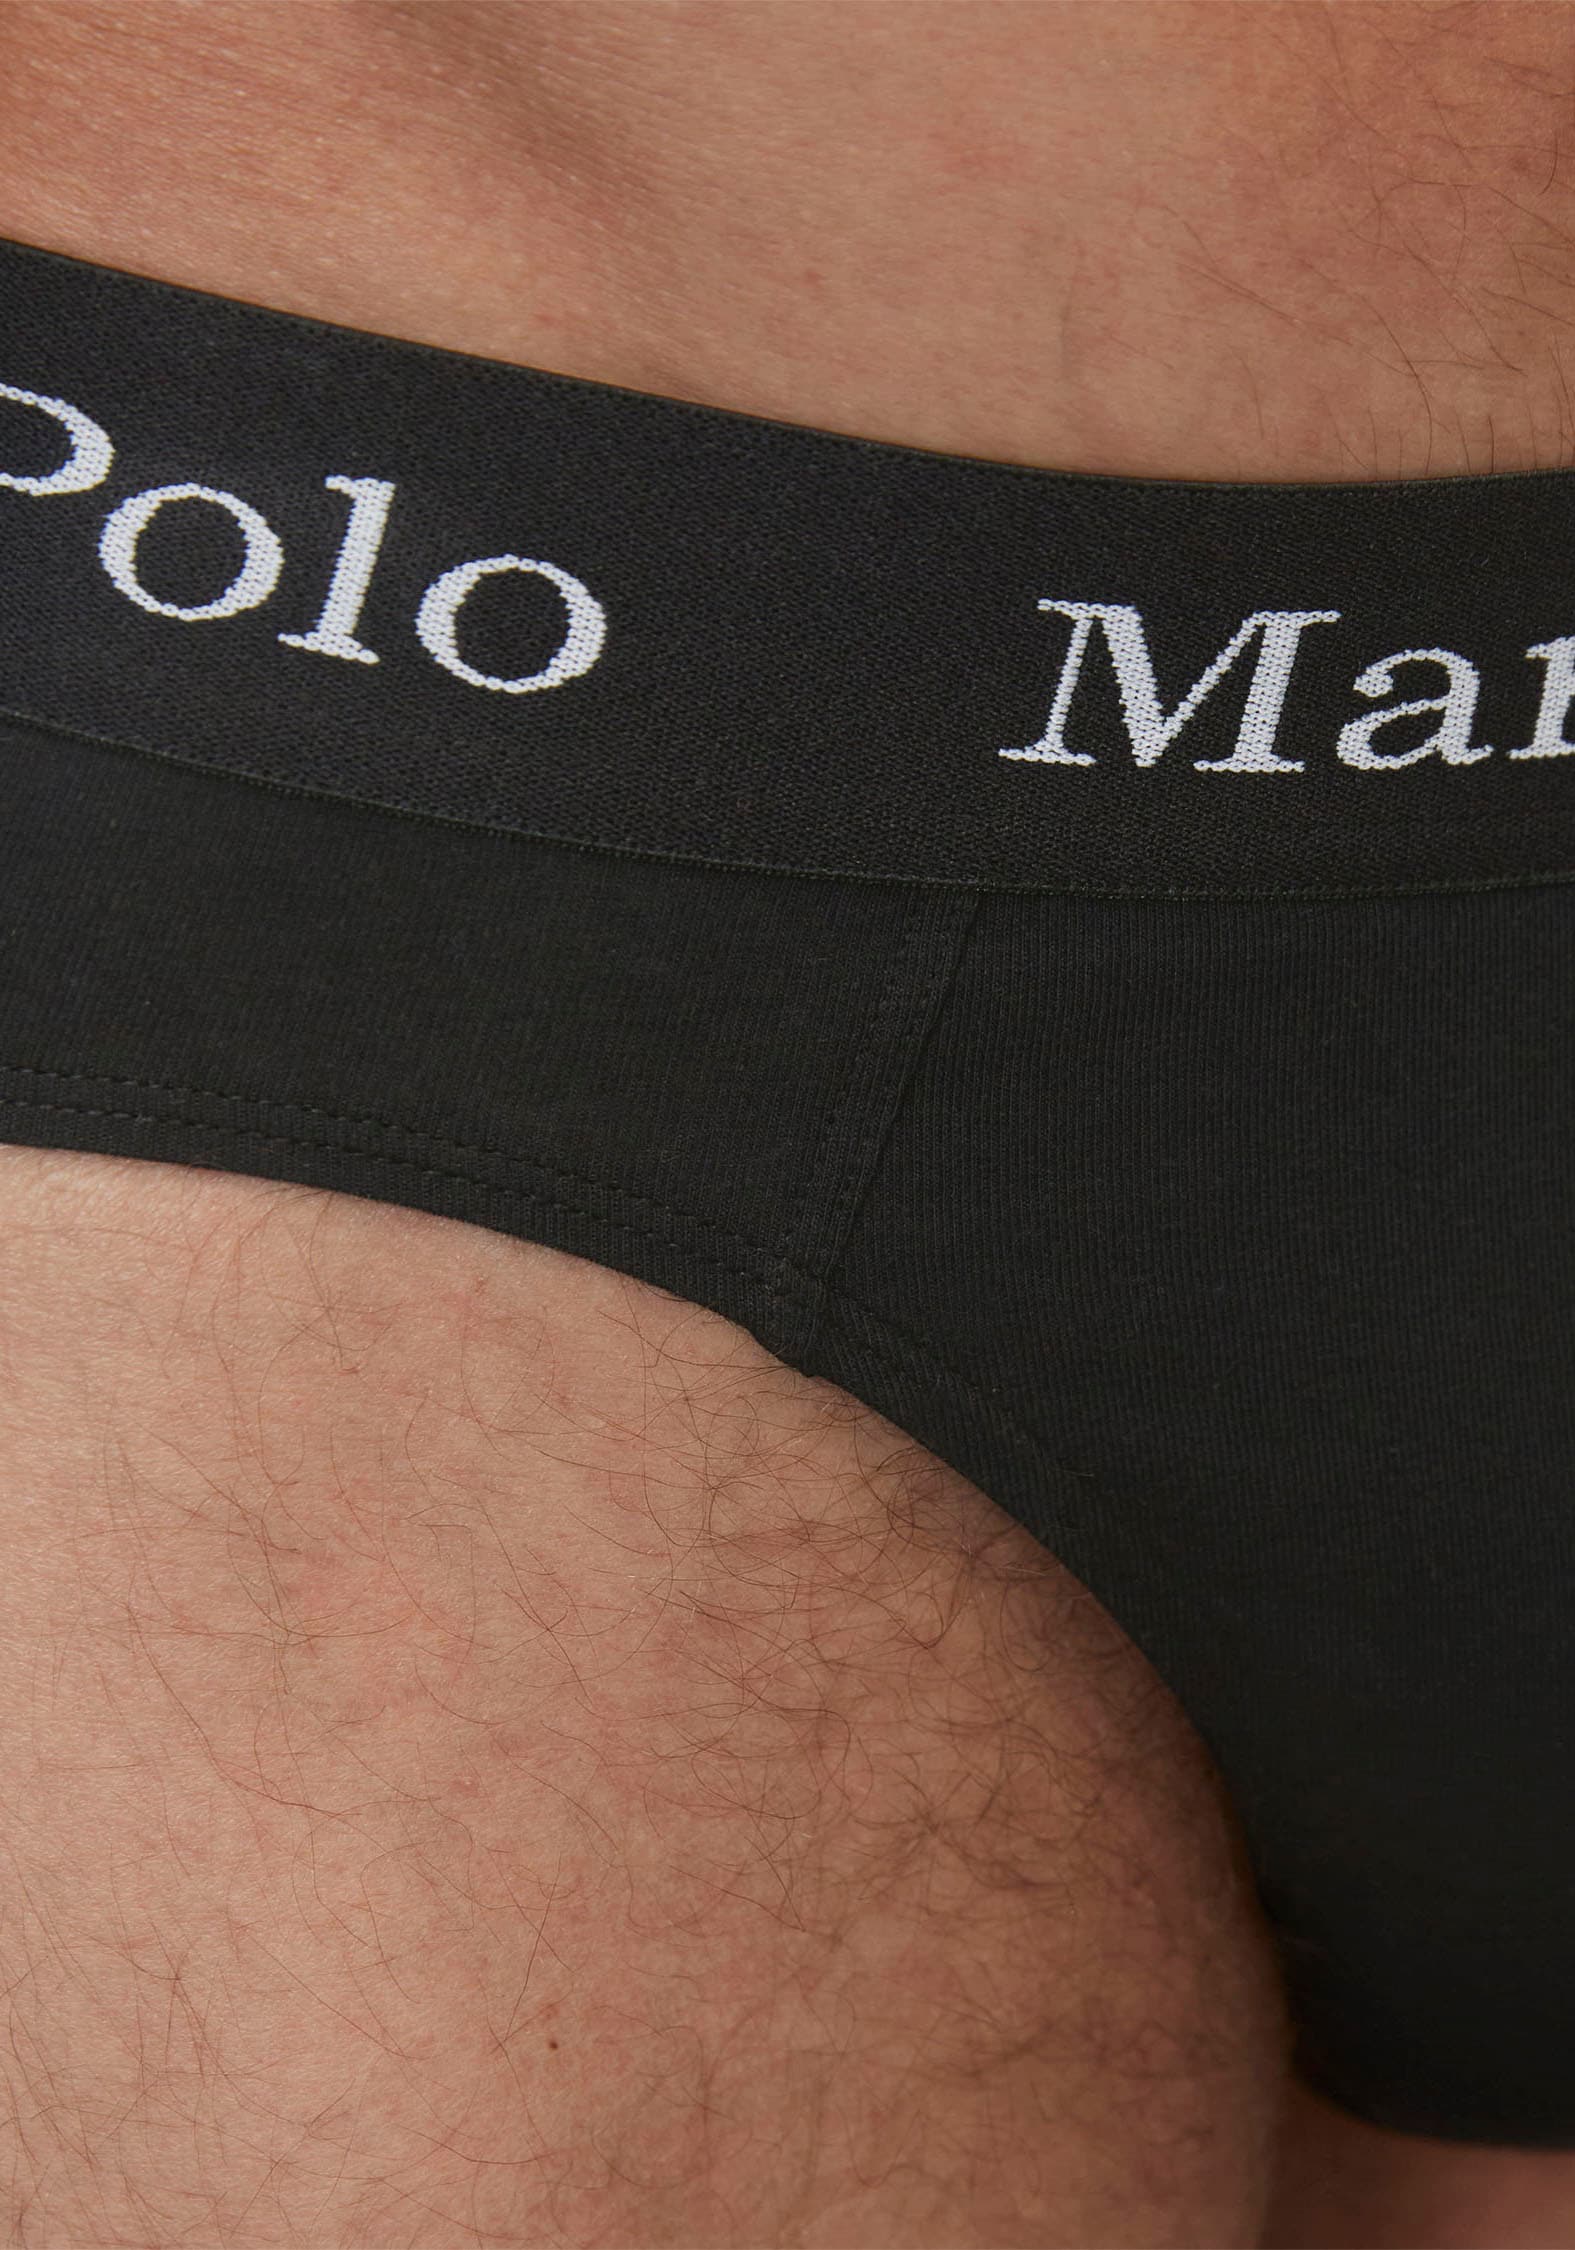 Marc O'Polo Slip »Elements«, (Packung, 3 St.), Softe Jersey Qualität